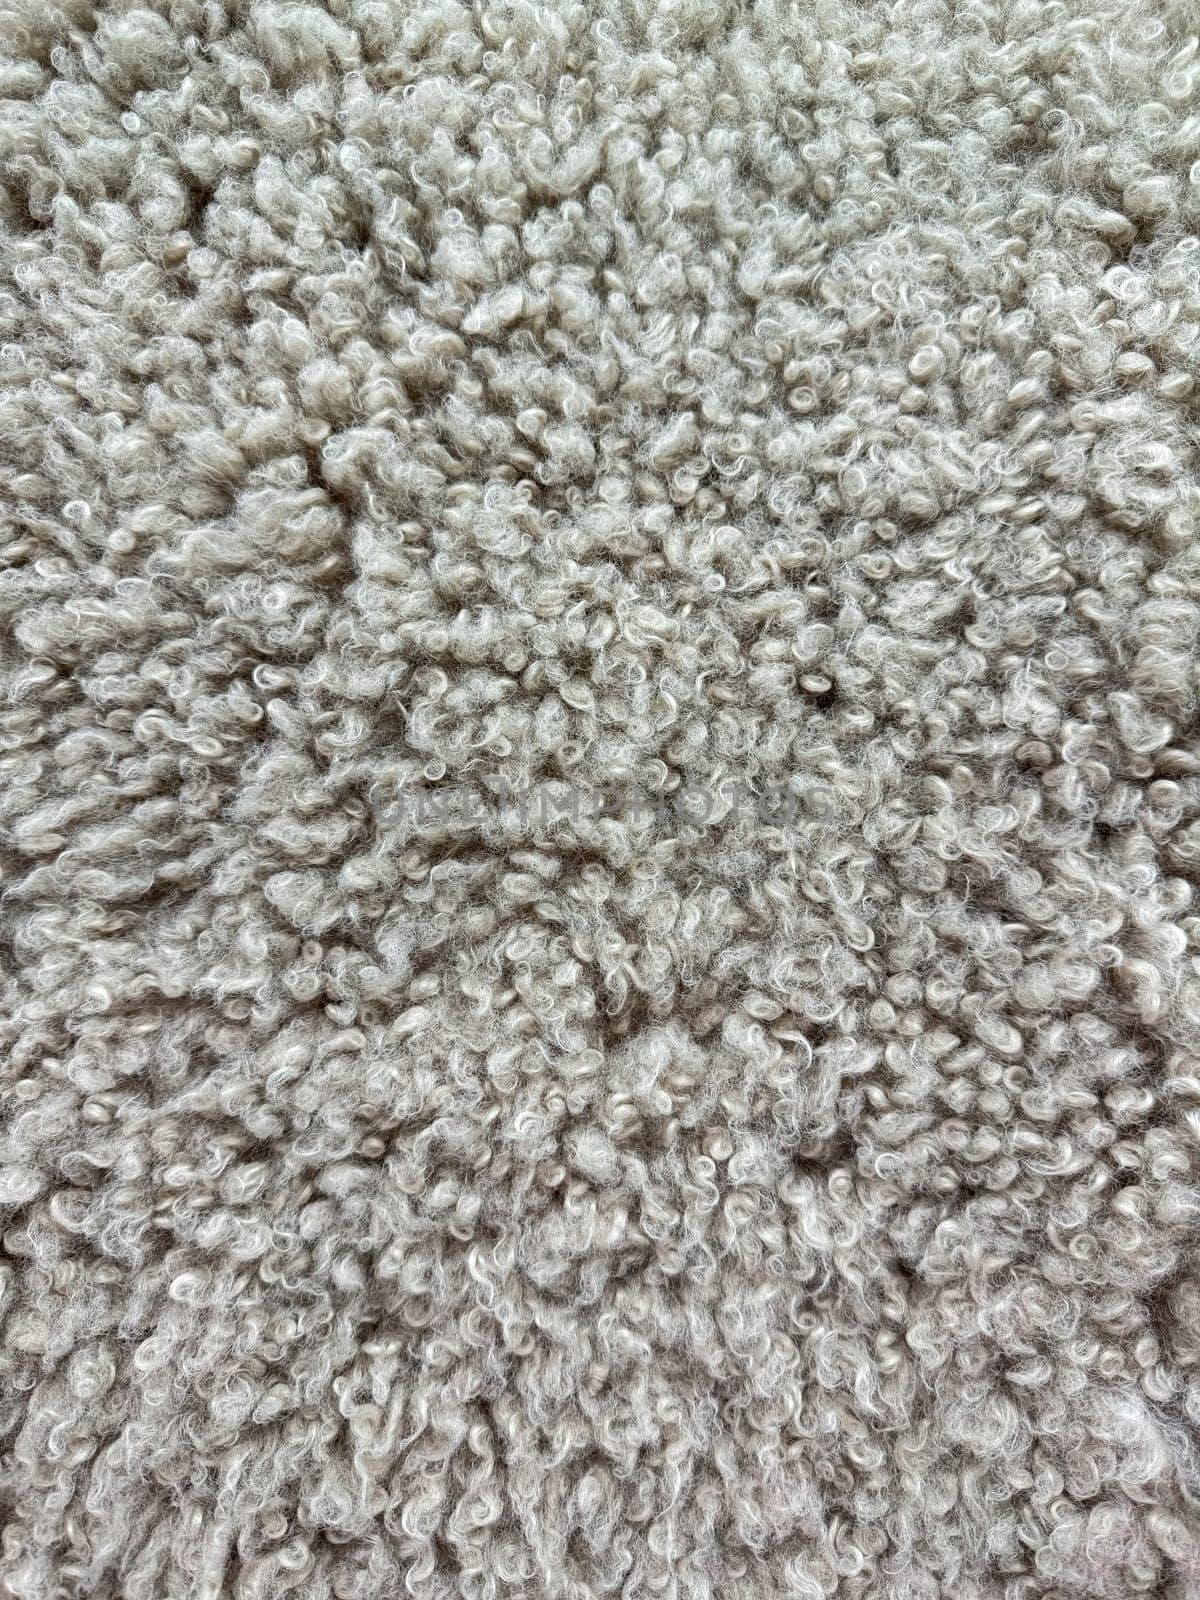 Detailed macro shot of dense, curly grey wool texture with natural fleece patterns for interior design and textiles. High quality photo